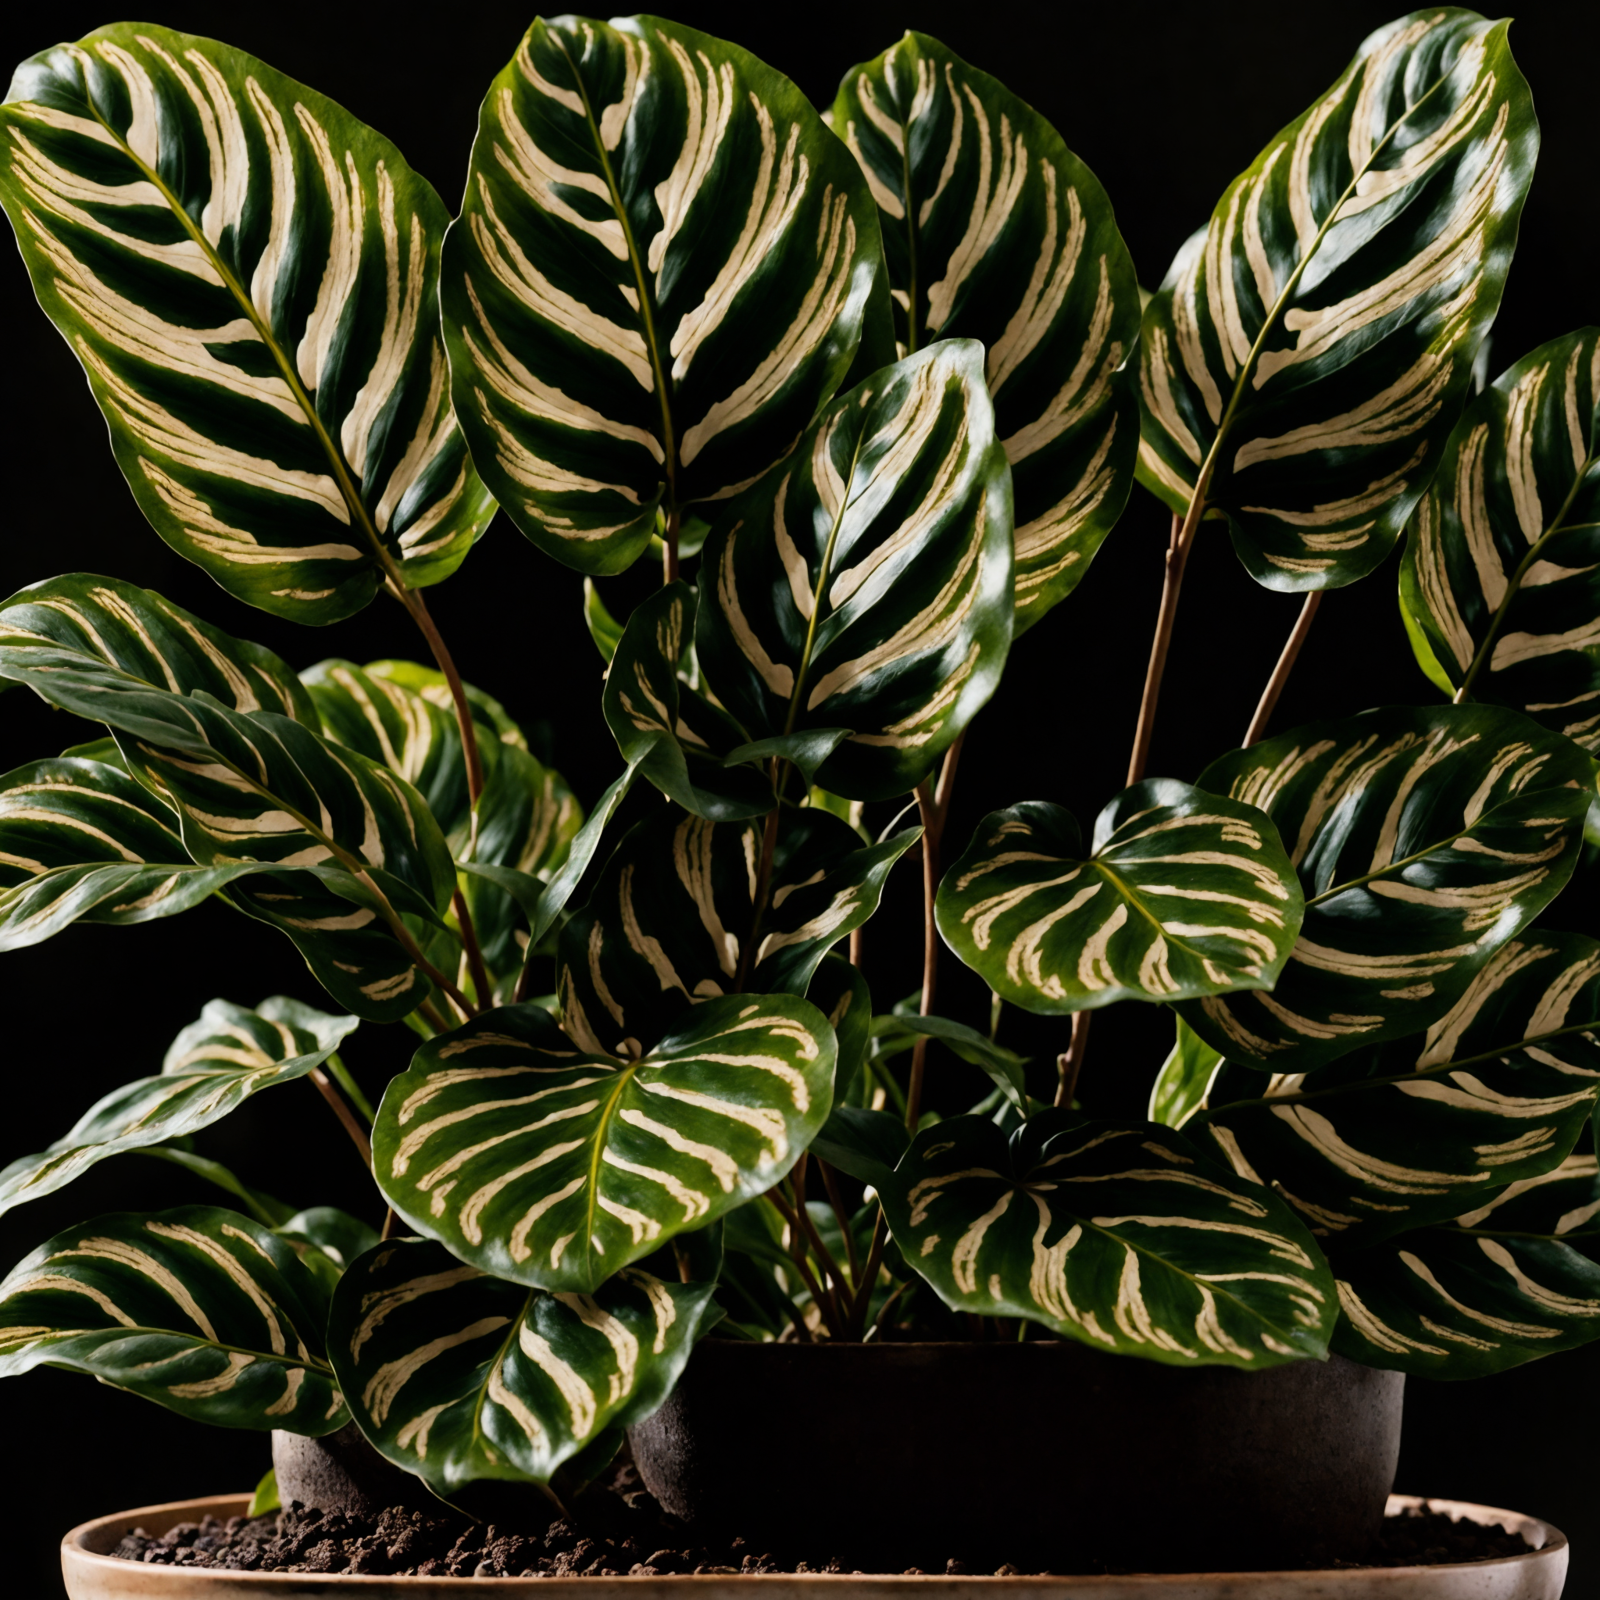 Goeppertia makoyana (prayer plant) with patterned leaves in a bowl planter, clear indoor lighting, dark background.